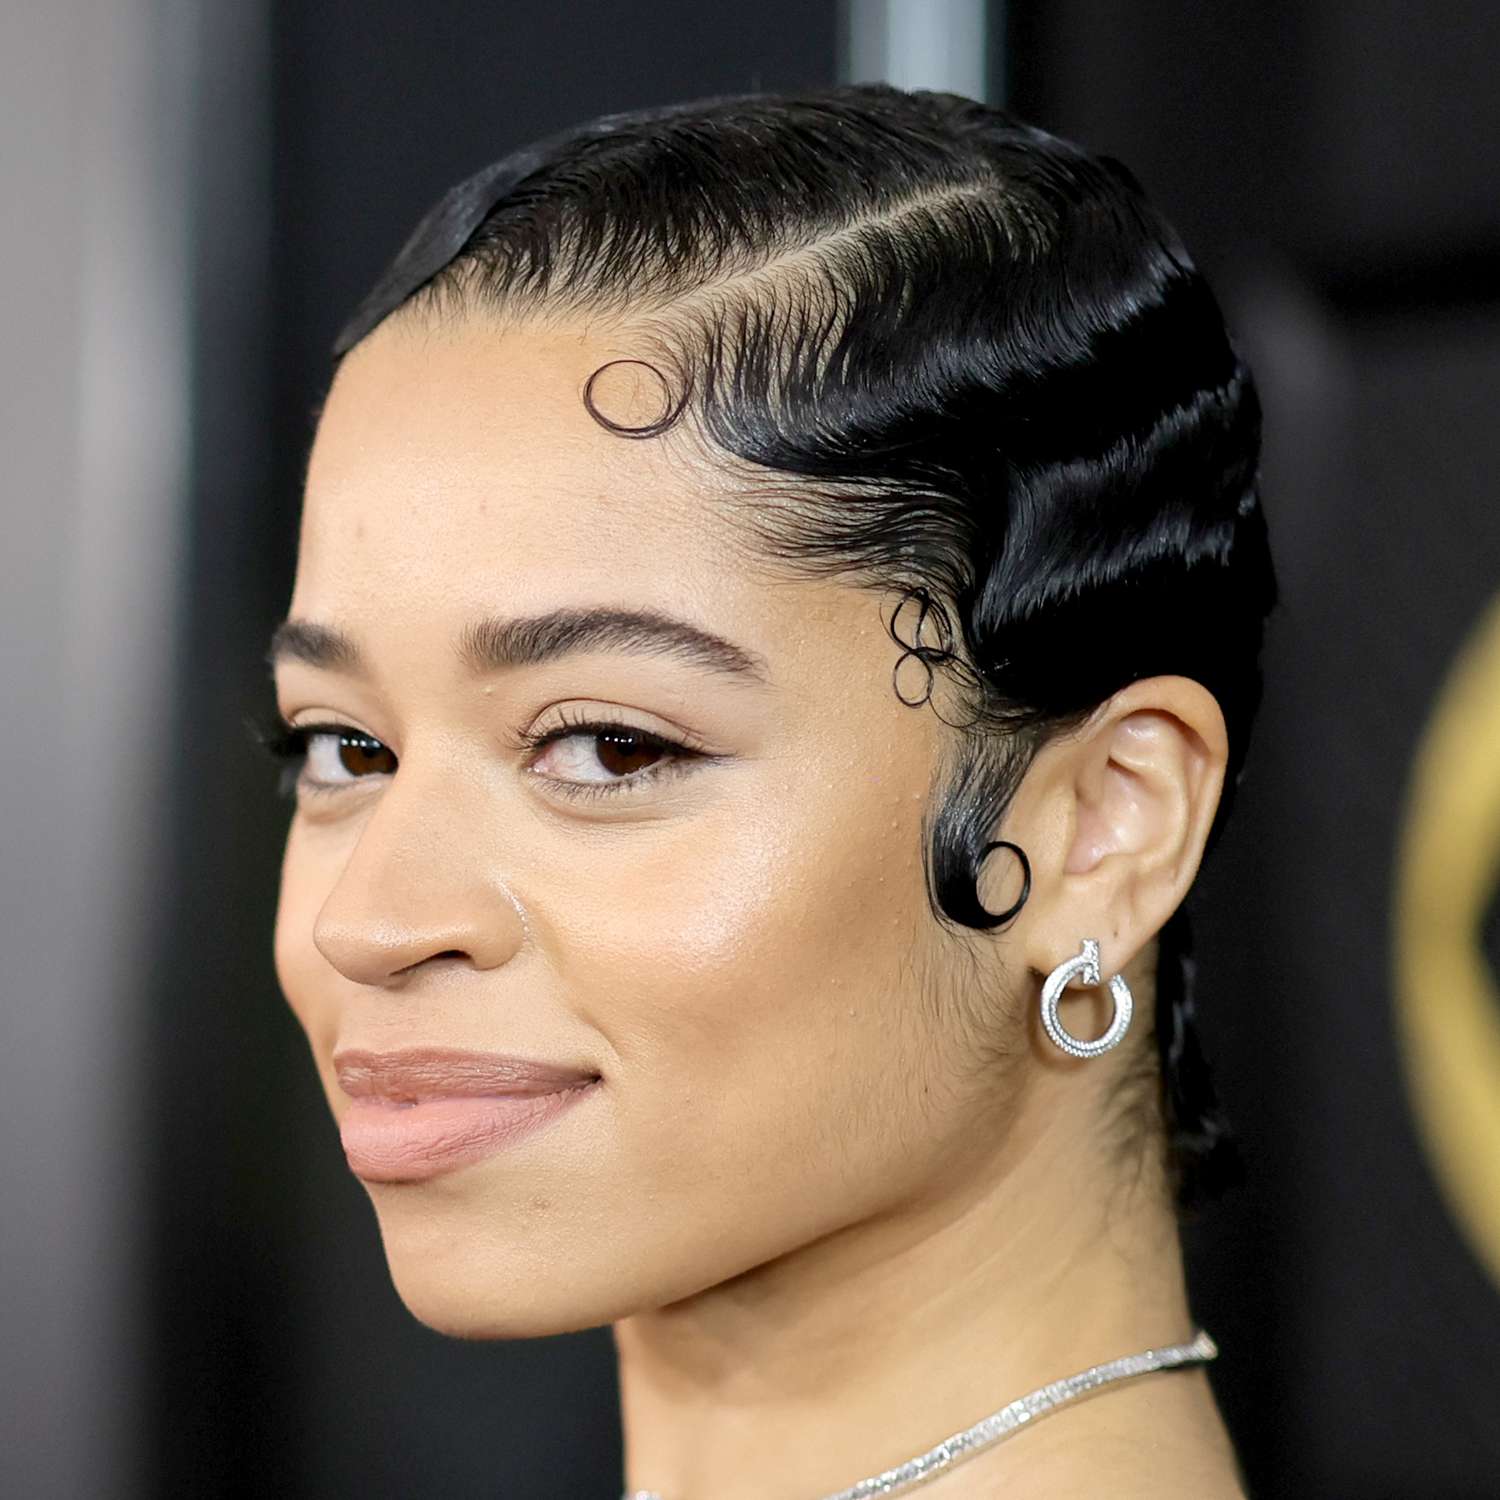 Ella Mai attends the Grammys with a 1920s styled pixie